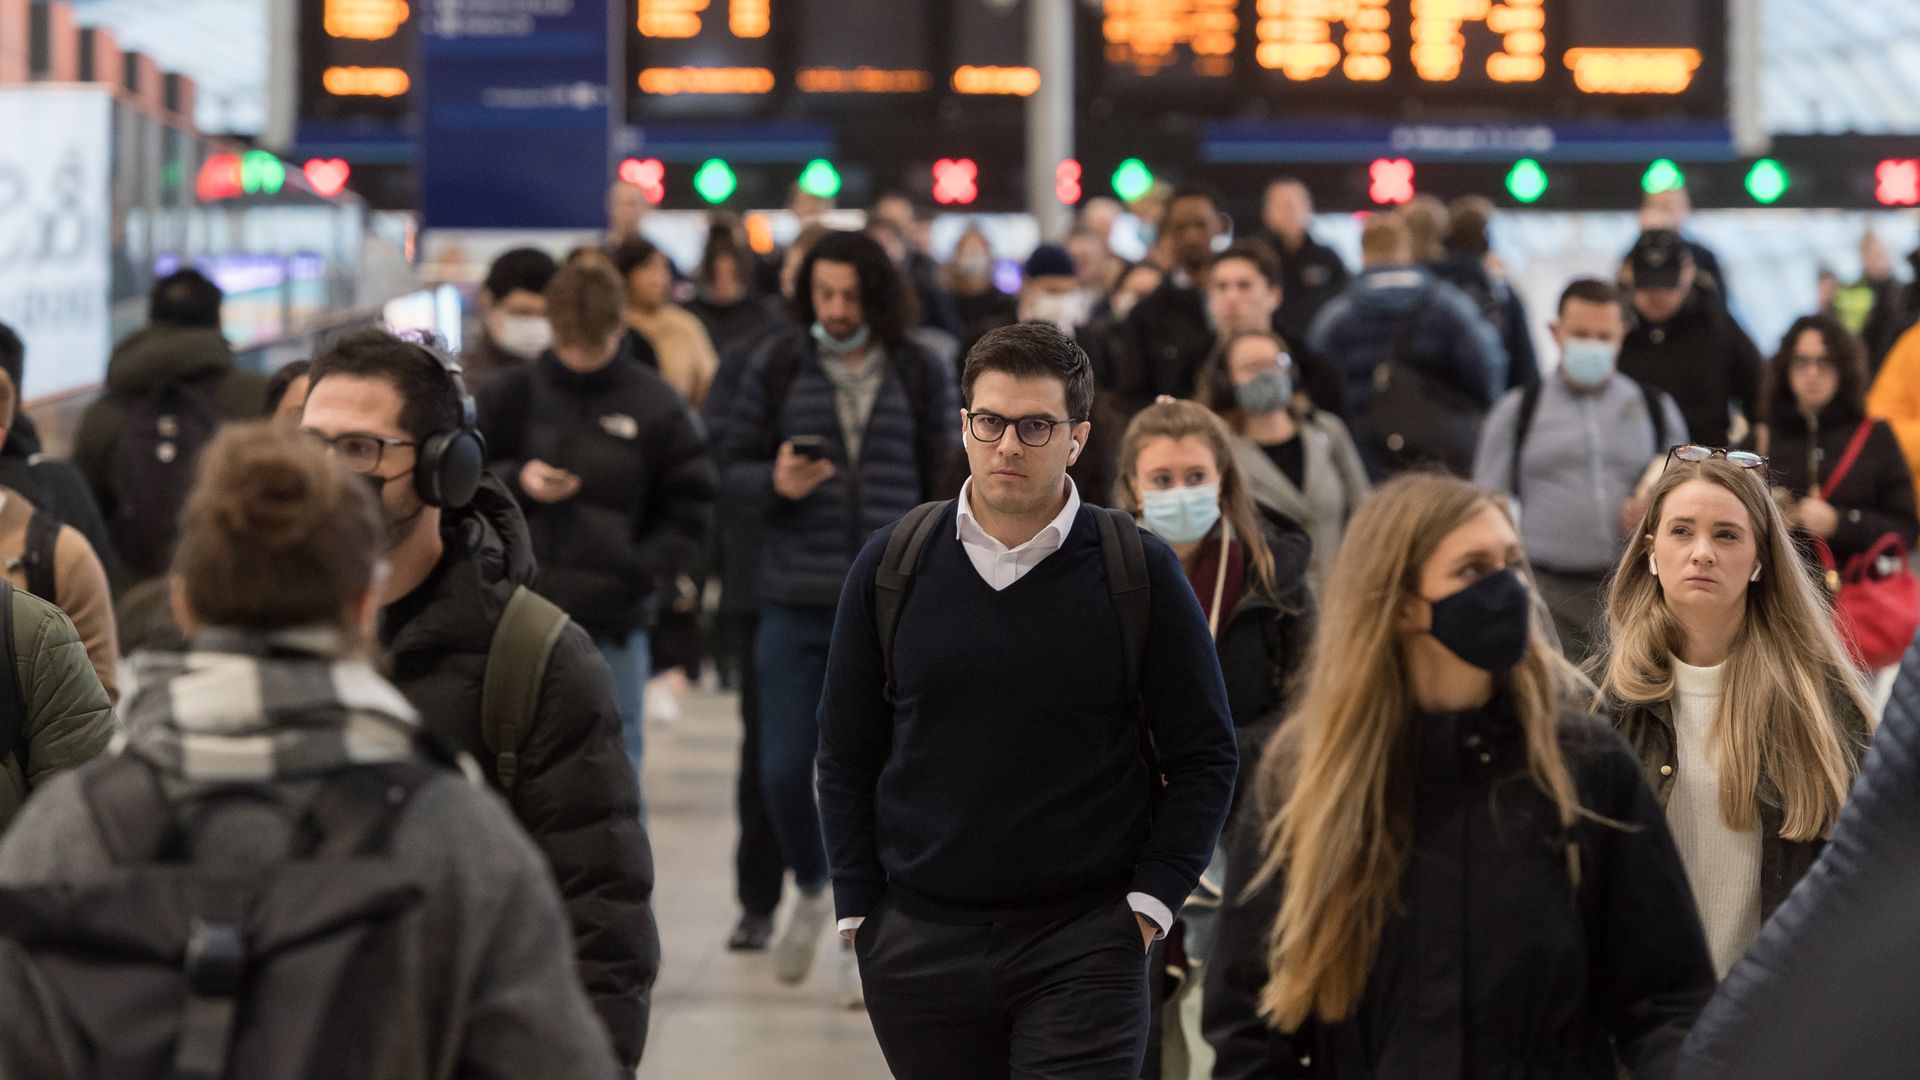 Commuters arrive at Waterloo station during morning rush hour as all of England's remaining Covid restrictions are set to end later this week on February 22, 2022 in London, England. 